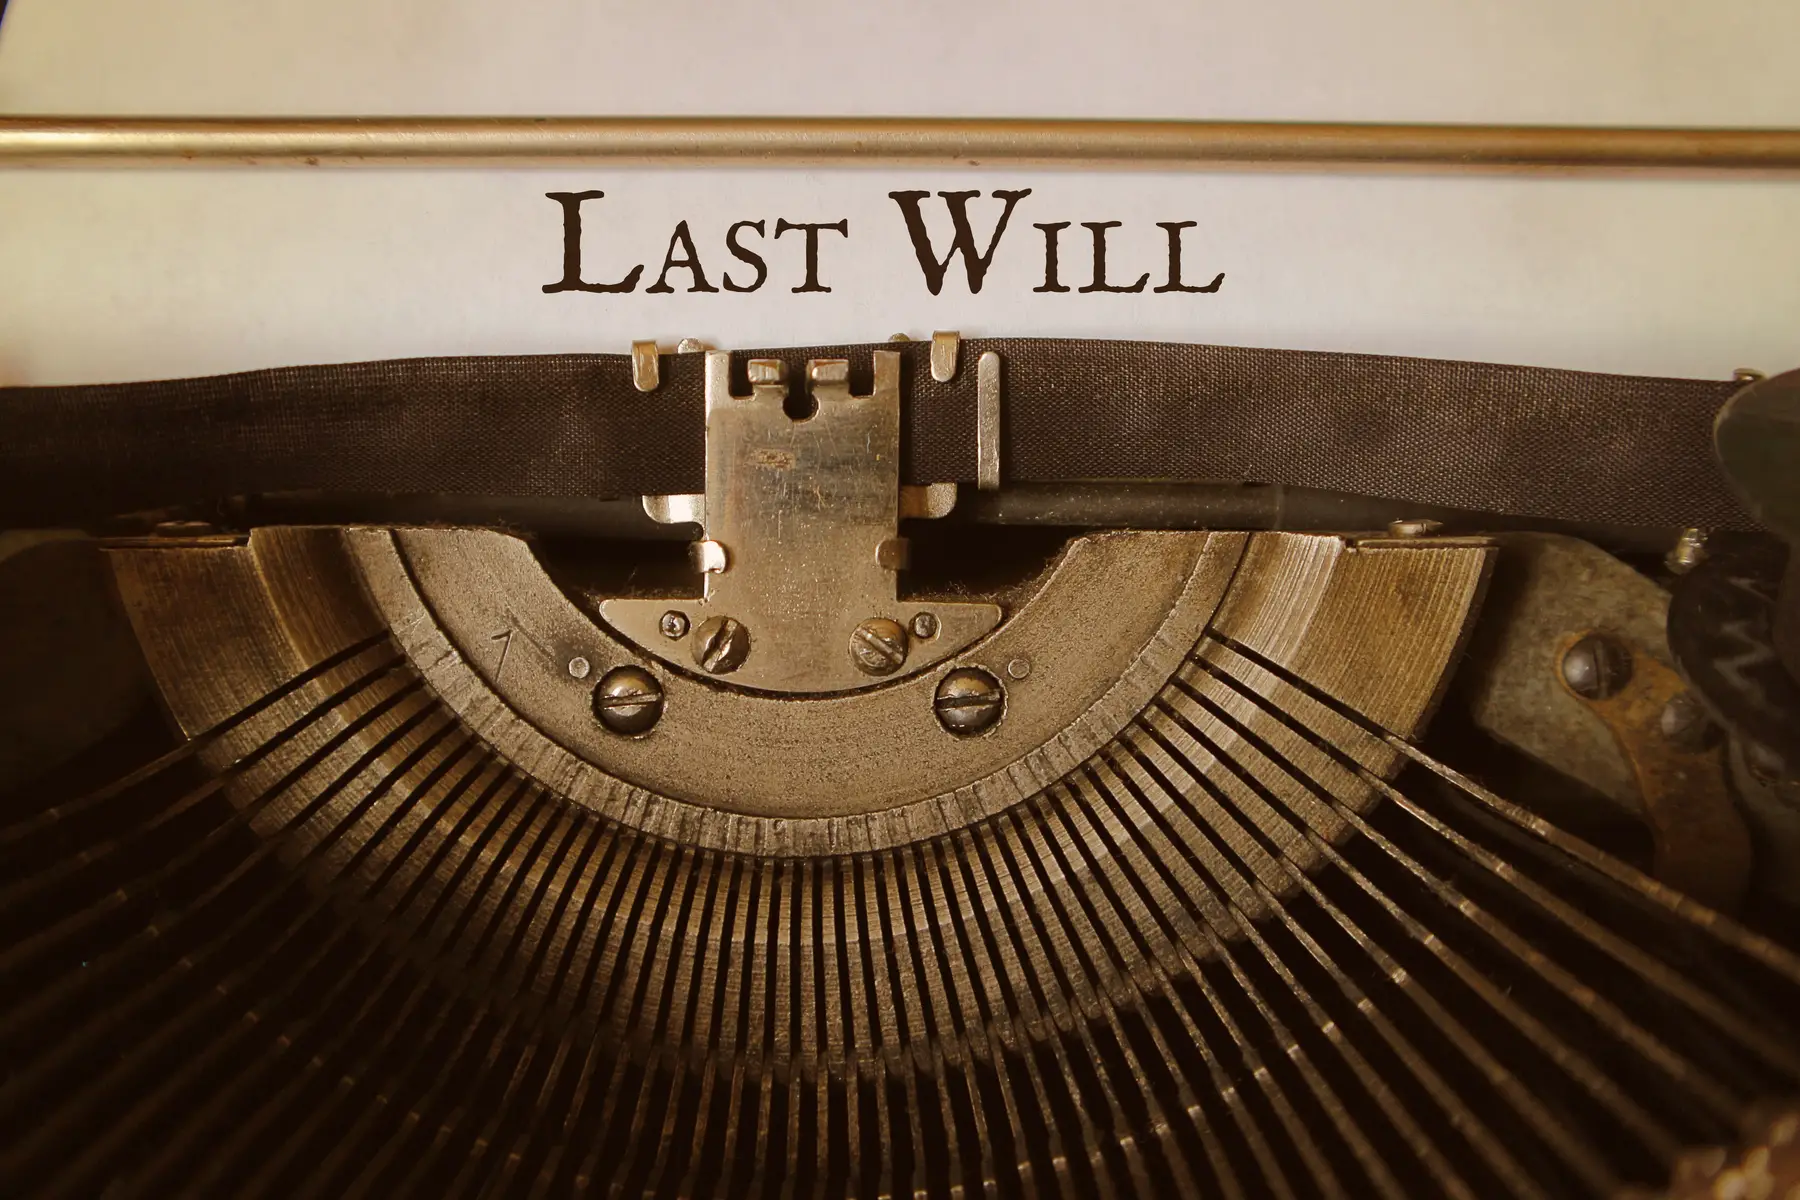 Typing a last will on a typewriter